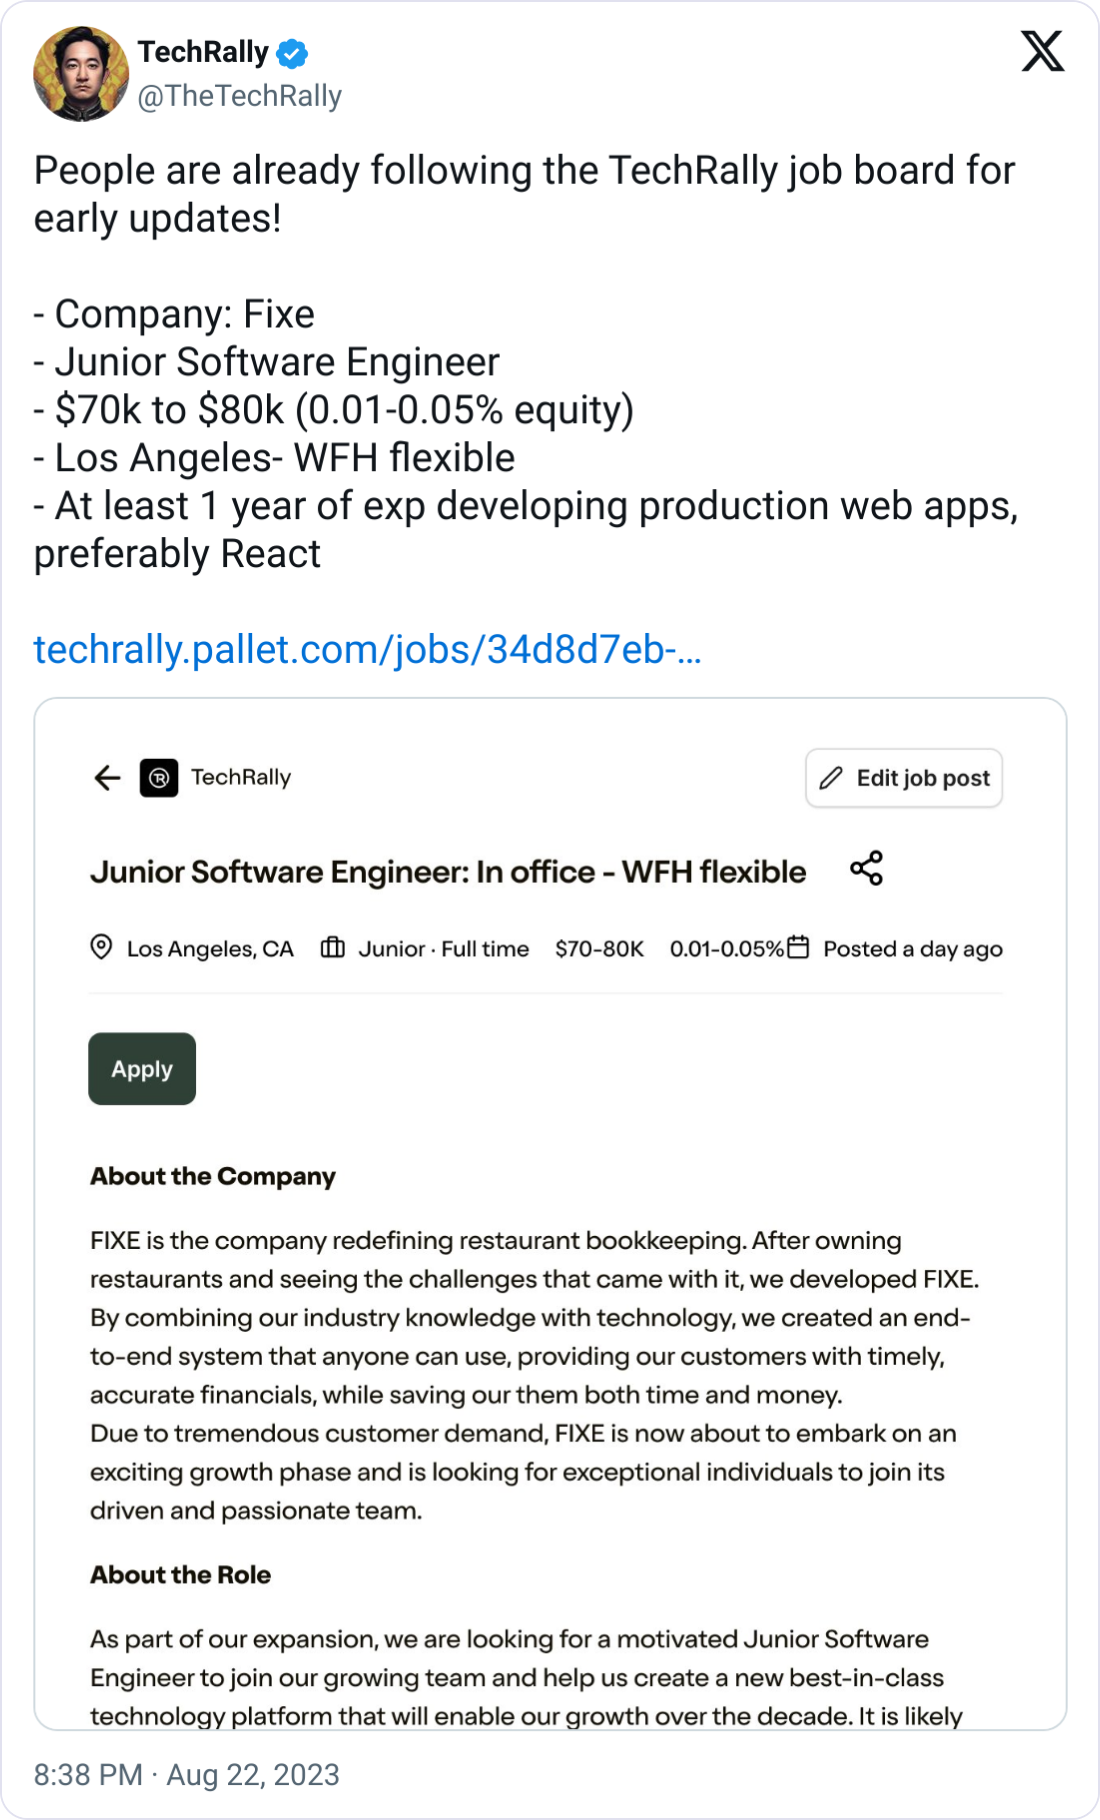 TechRally @TheTechRally People are already following the TechRally job board for early updates!  - Company: Fixe - Junior Software Engineer - $70k to $80k (0.01-0.05% equity) - Los Angeles- WFH flexible - At least 1 year of exp developing production web apps, preferably React